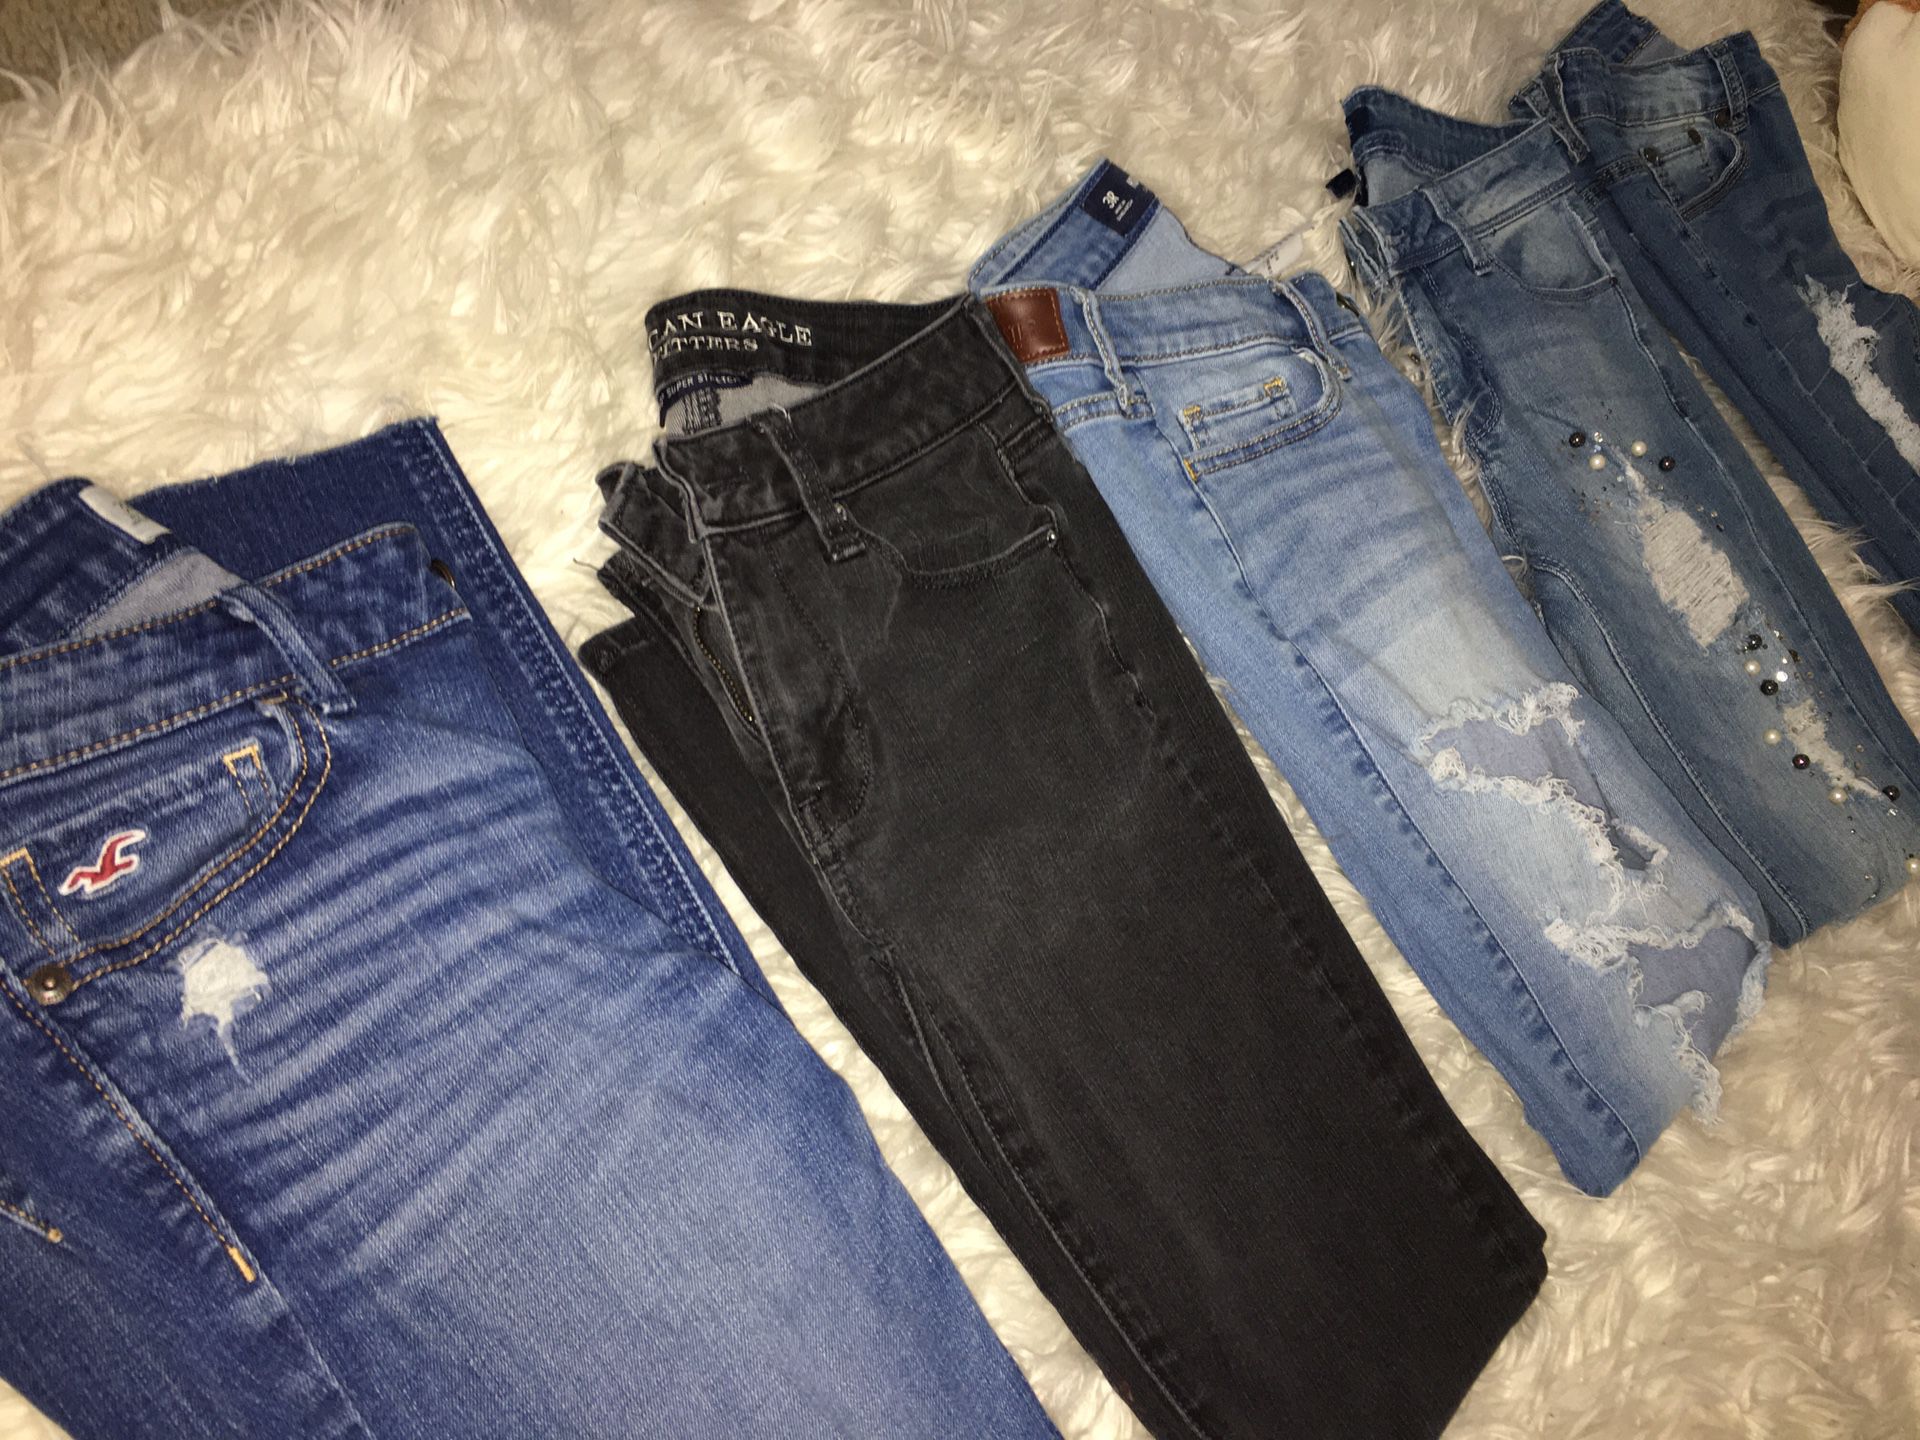 Denim Jeans (Hollister, American Eagle, Hollister, bamboo, and brand new blue spice pearl jeans) all size 3 lightly worn and no damage 🙌